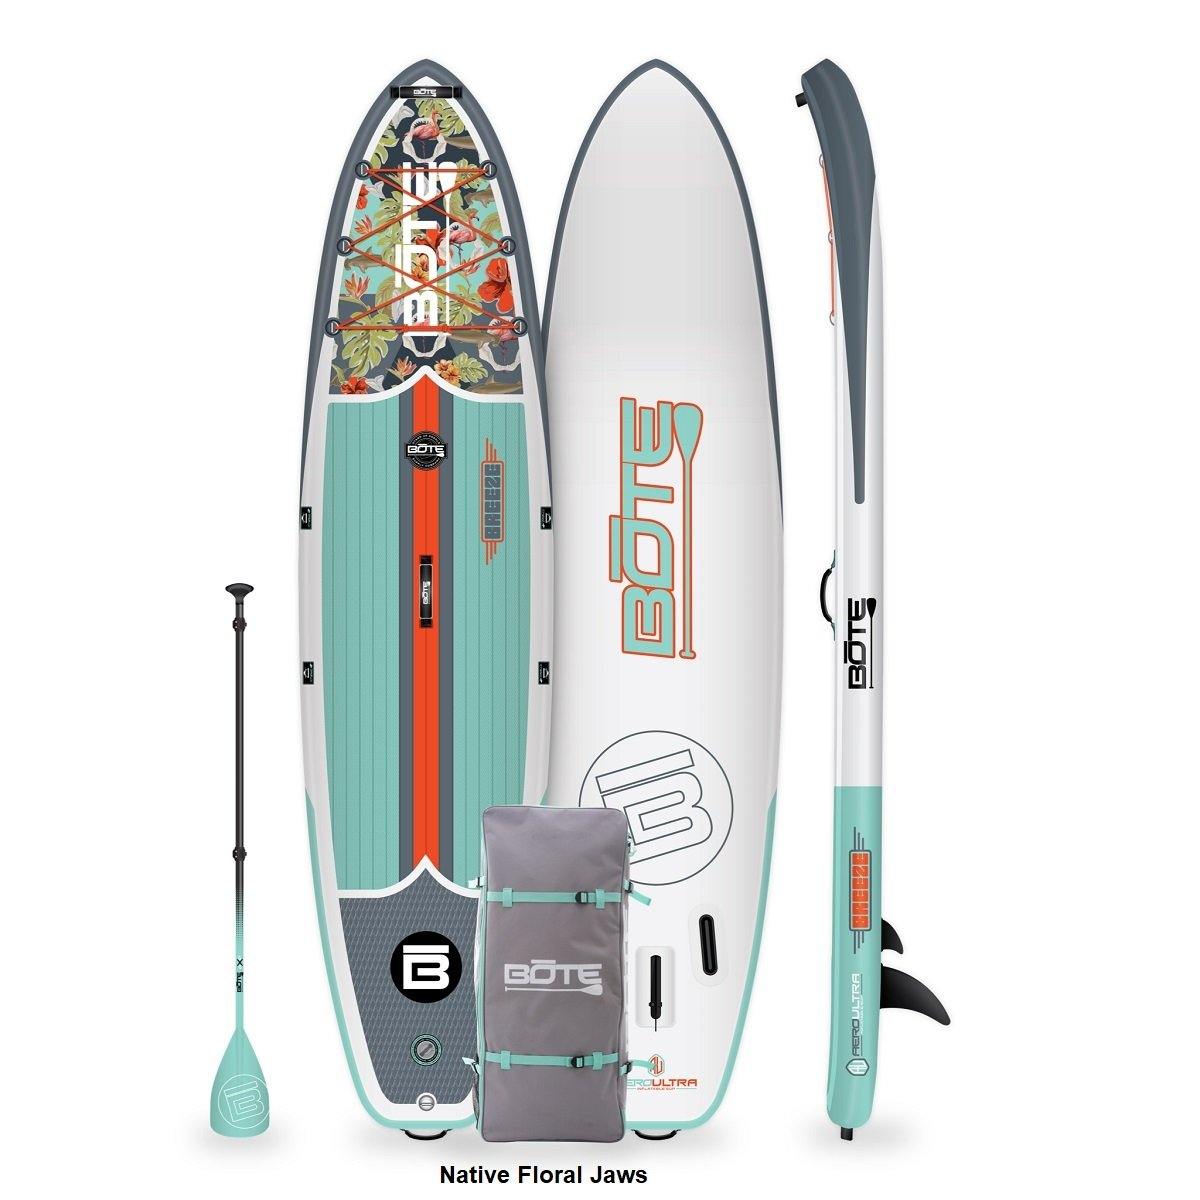 Breeze Aero Inflatable Paddle Board 10'8'' / Native Floral Jaws - MOCEAN Cape Cod